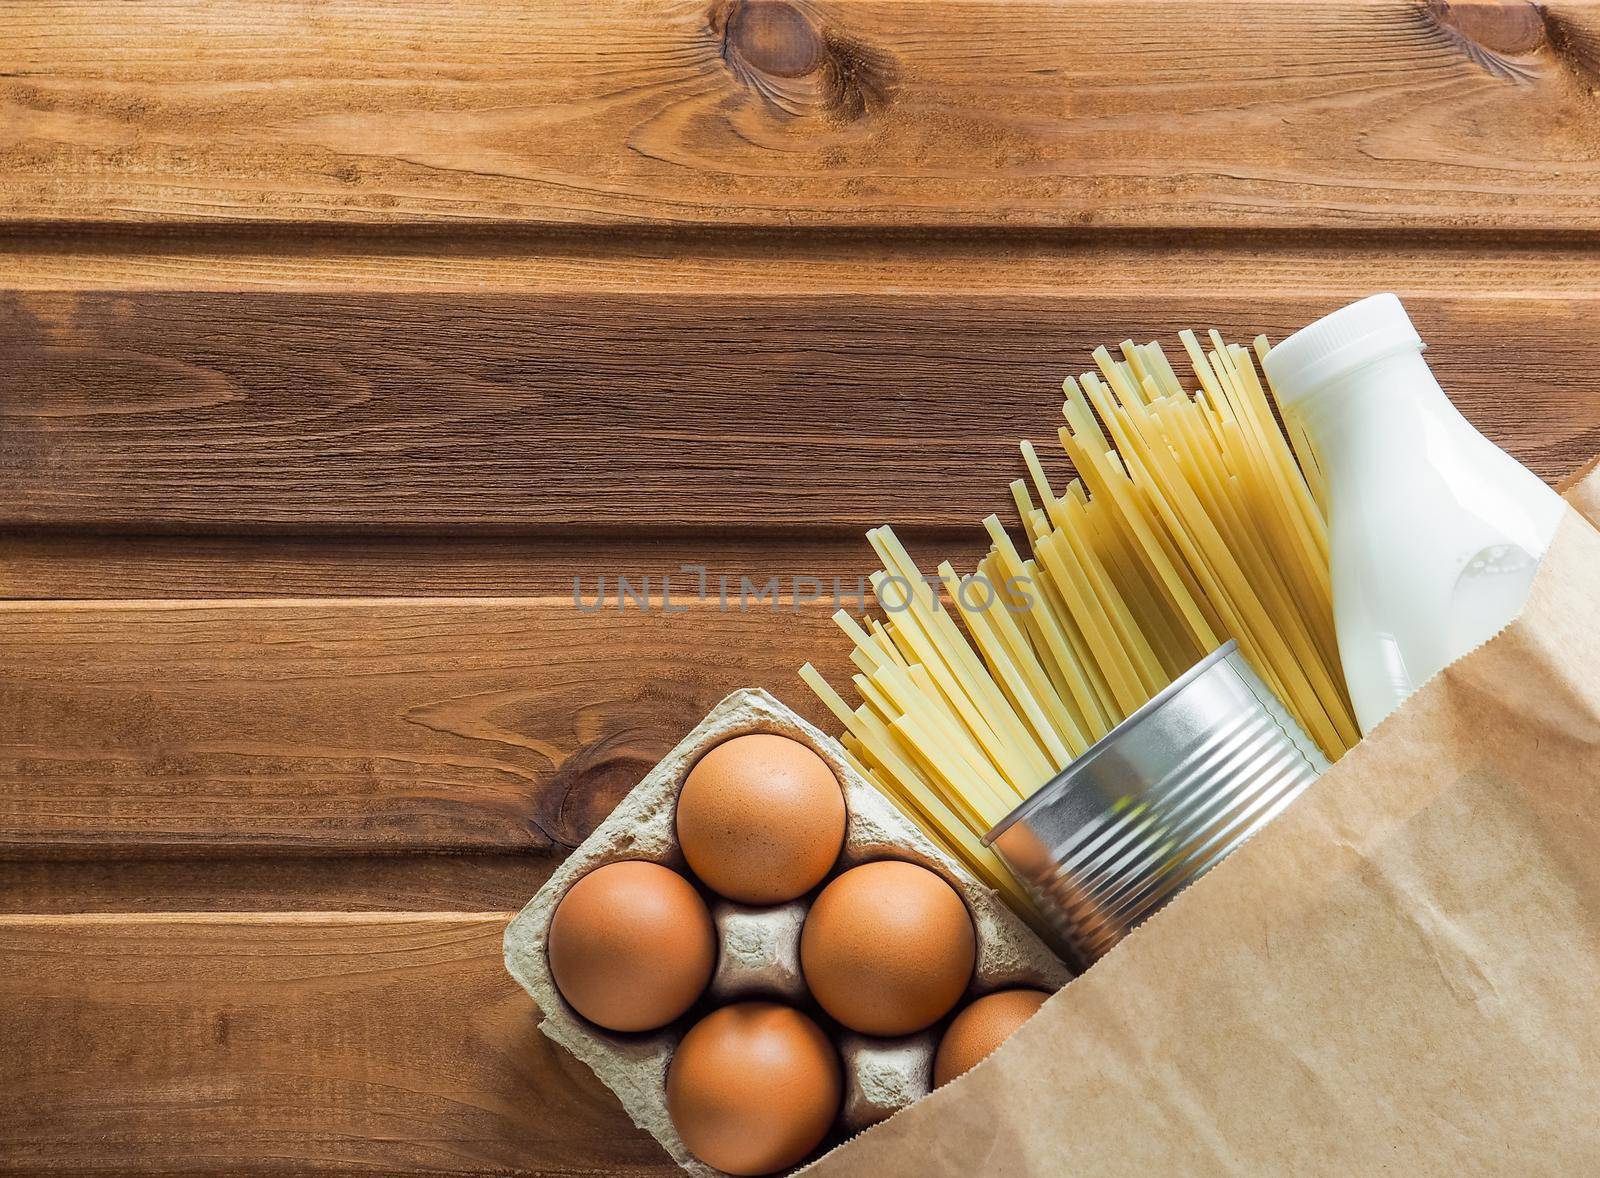 Food delivery, donation, coronavirus, humanitarian assistance. Paper bag with food supplies crisis stock for quarantine isolation period on wooden background. Eggs, milk, canned food, pasta. Copyspace